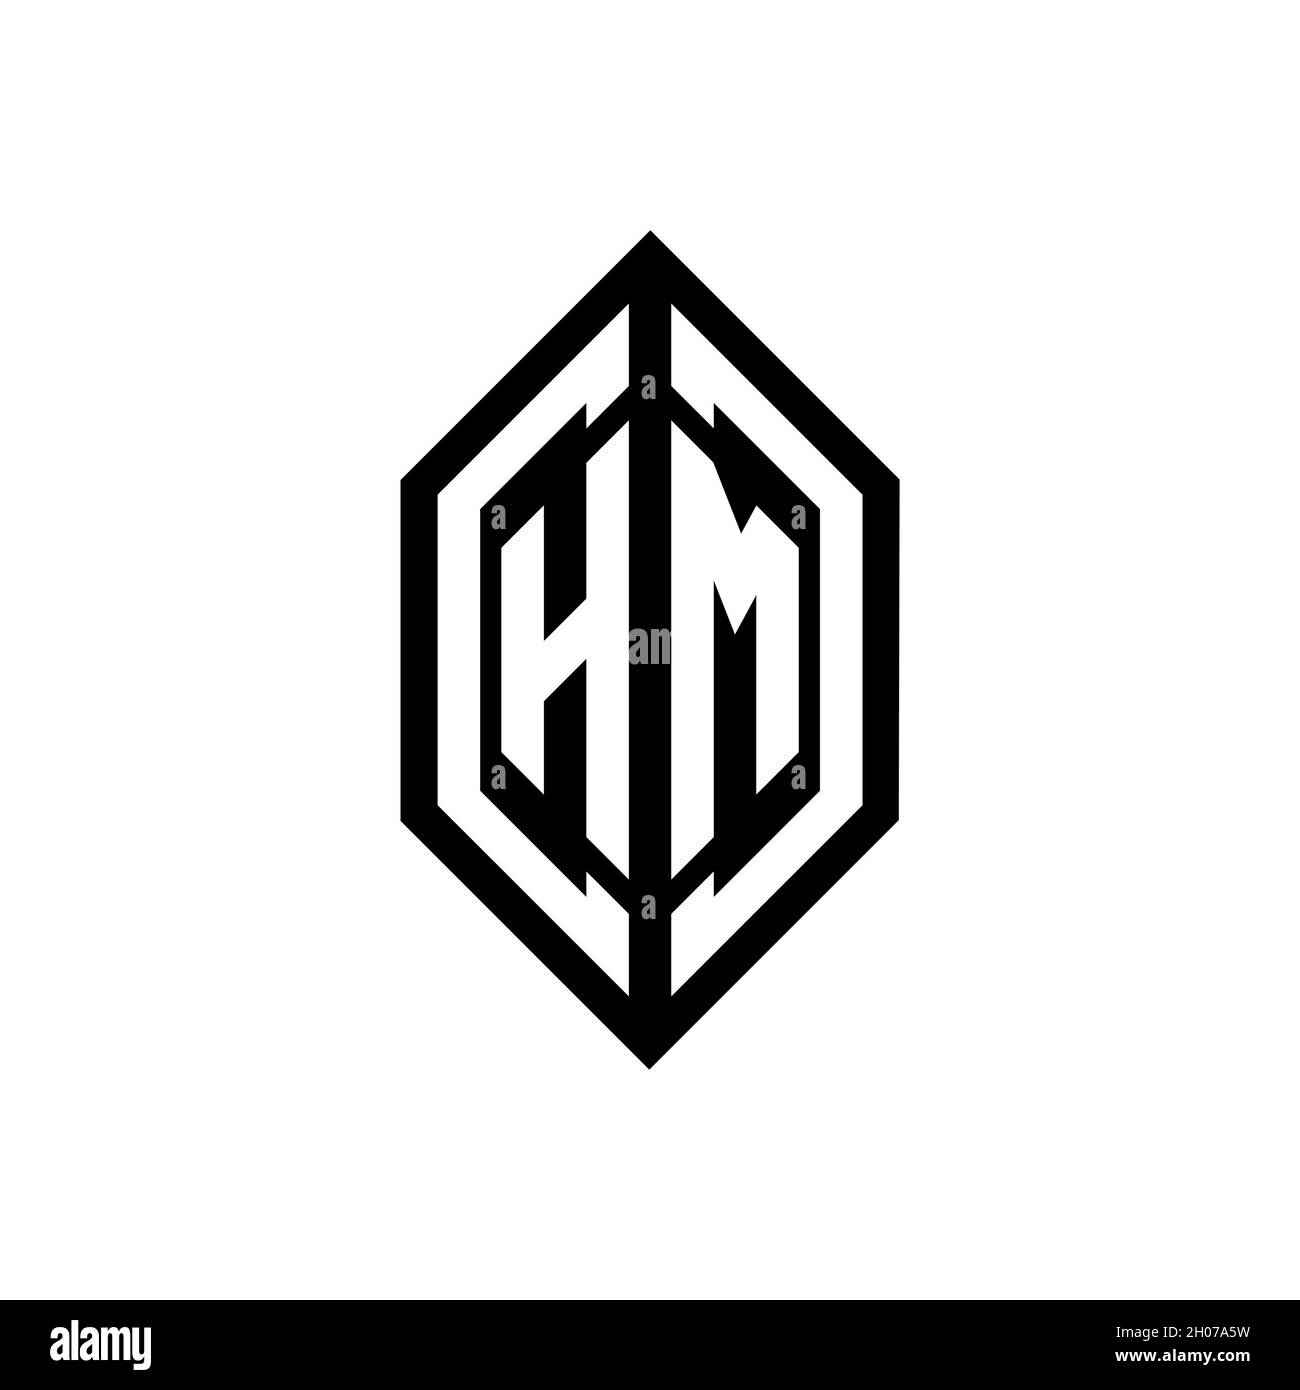 HM logo with geometric shape vector monogram design template isolated on white background Stock Vector